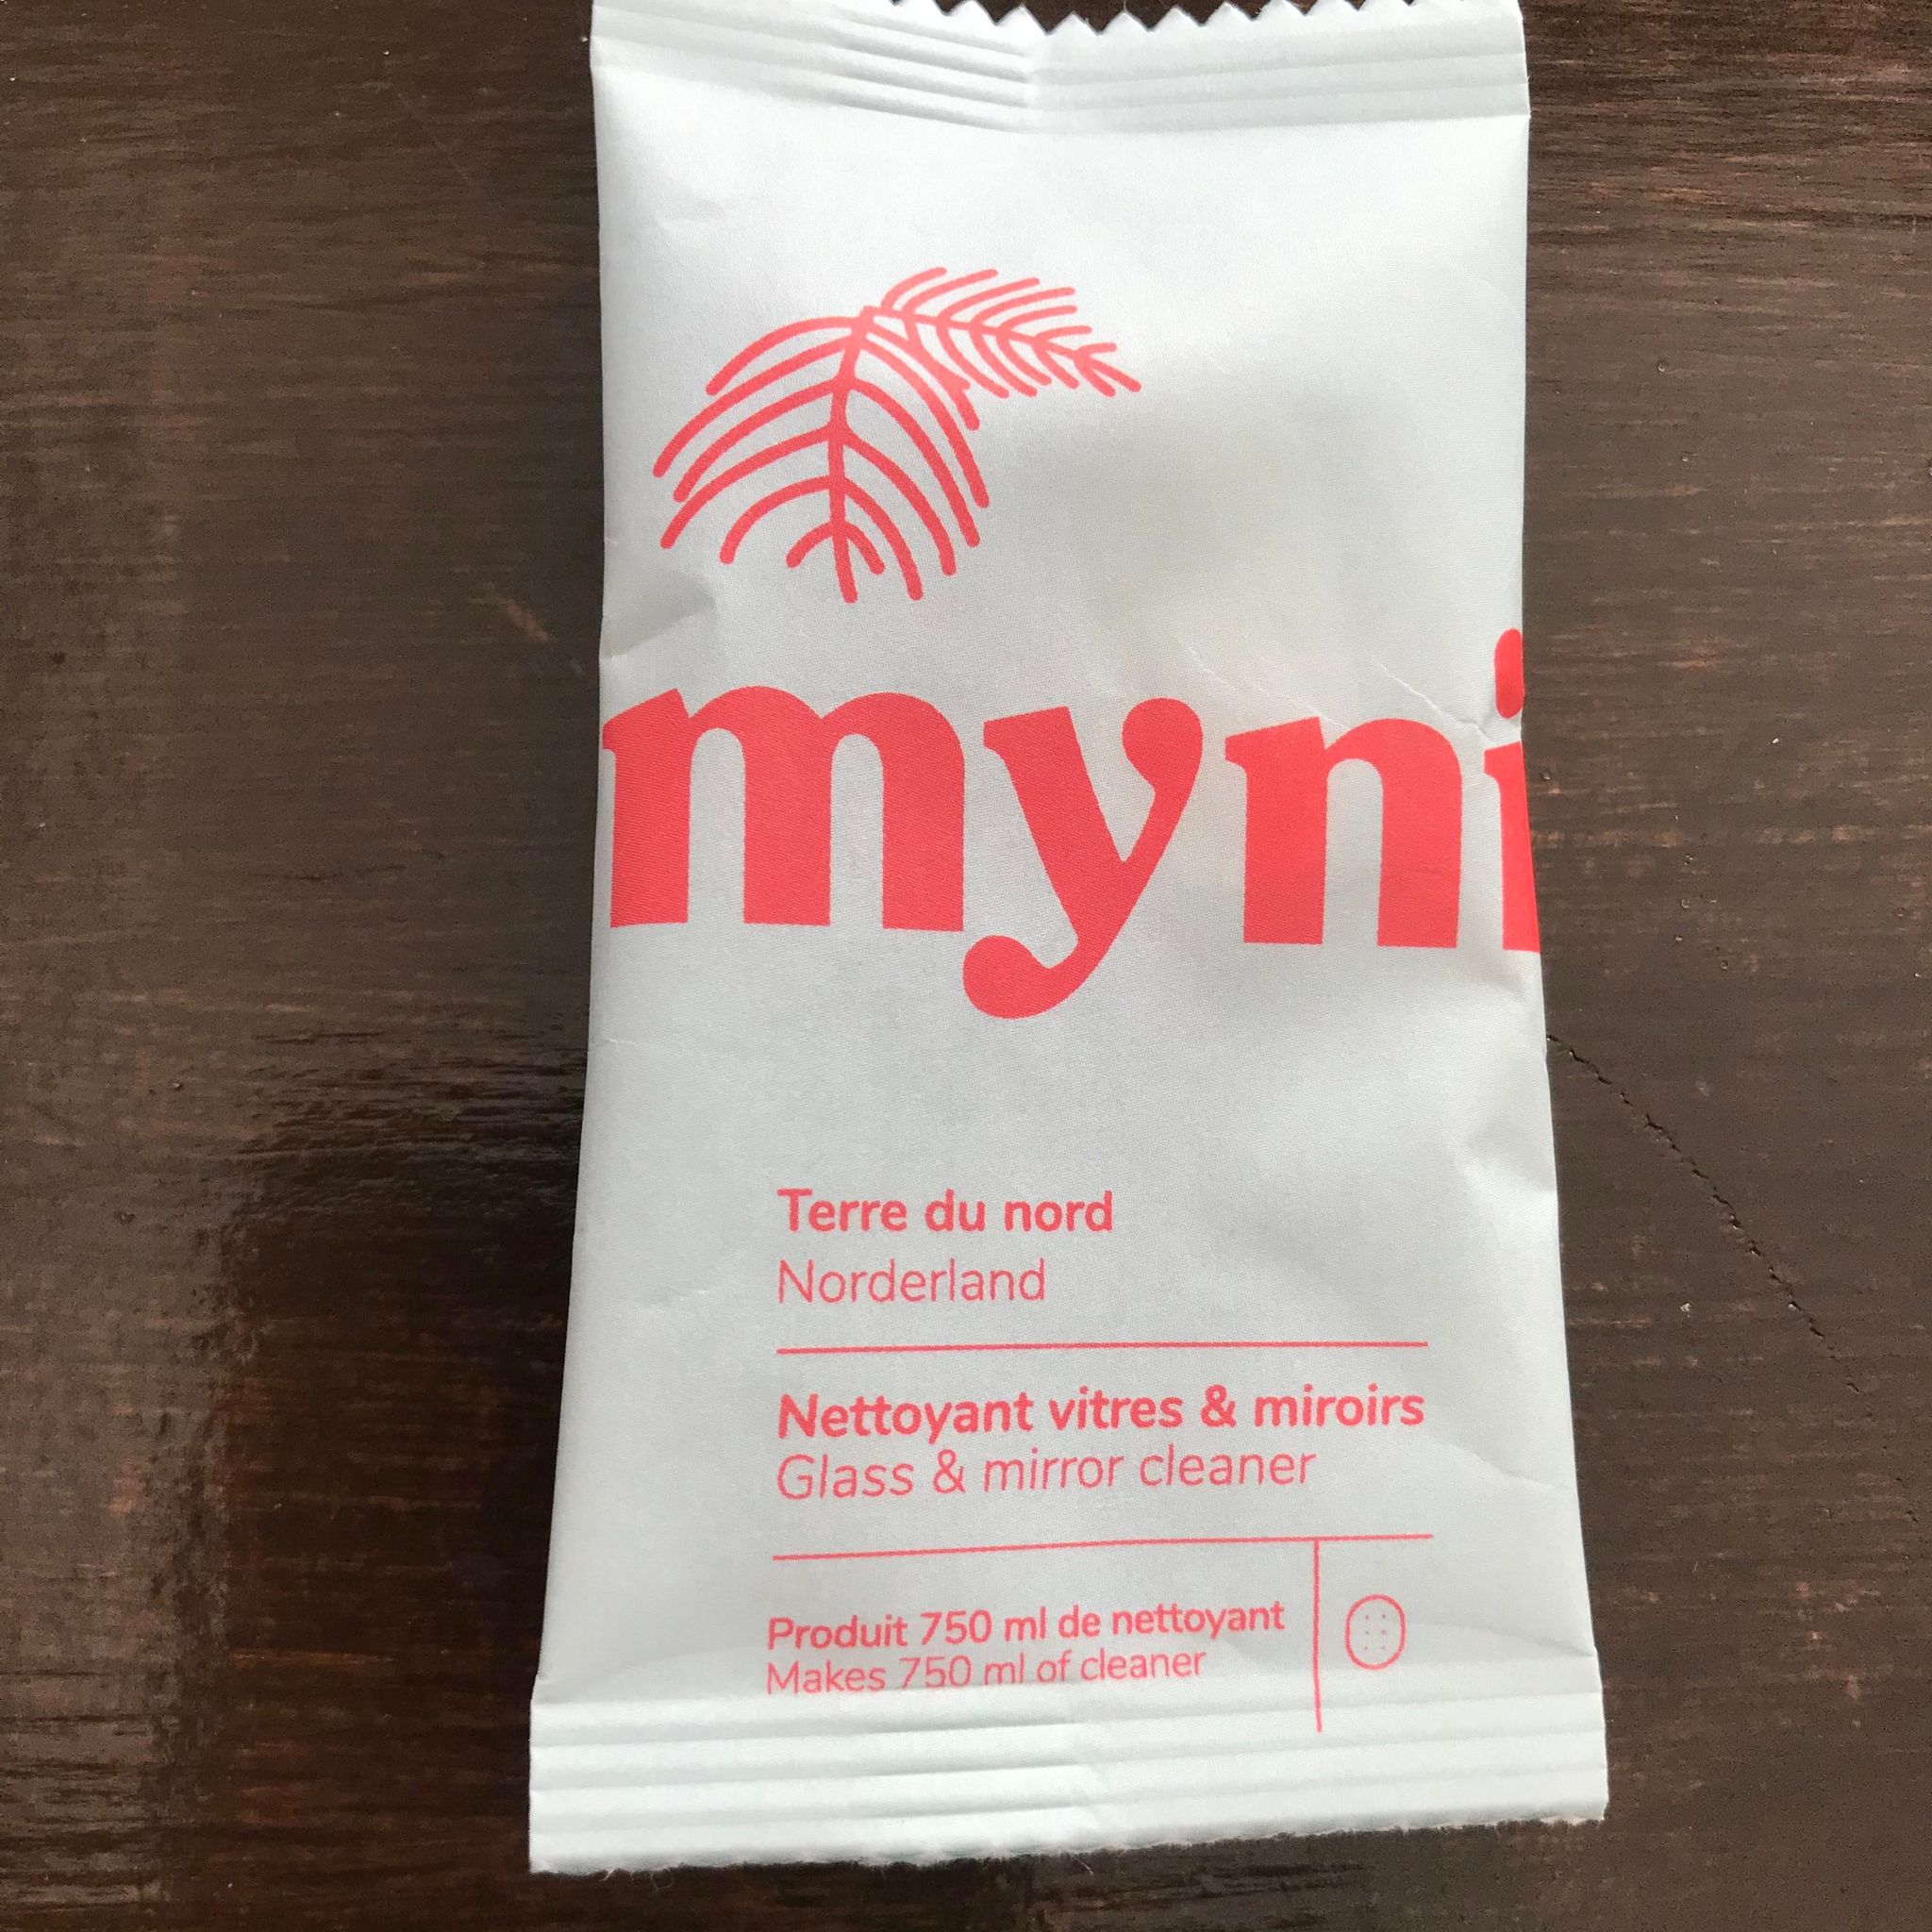 Norderland black spruce scented glass and mirror cleaner cleaning tablet concentrate in a compostable pouch made in canada by myni